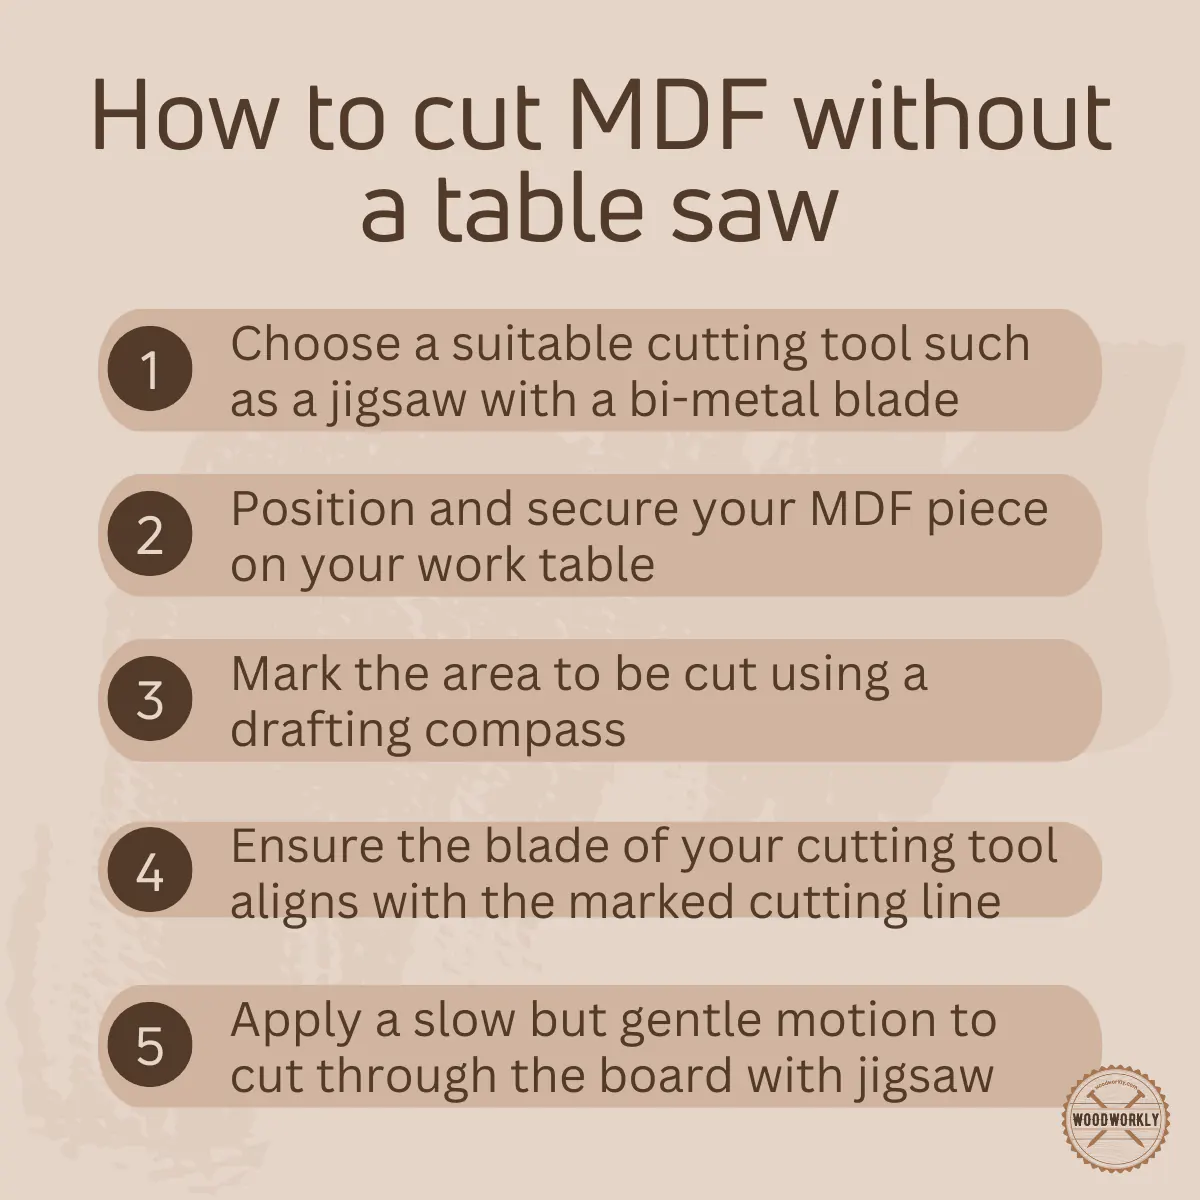 How to cut MDF without a table saw